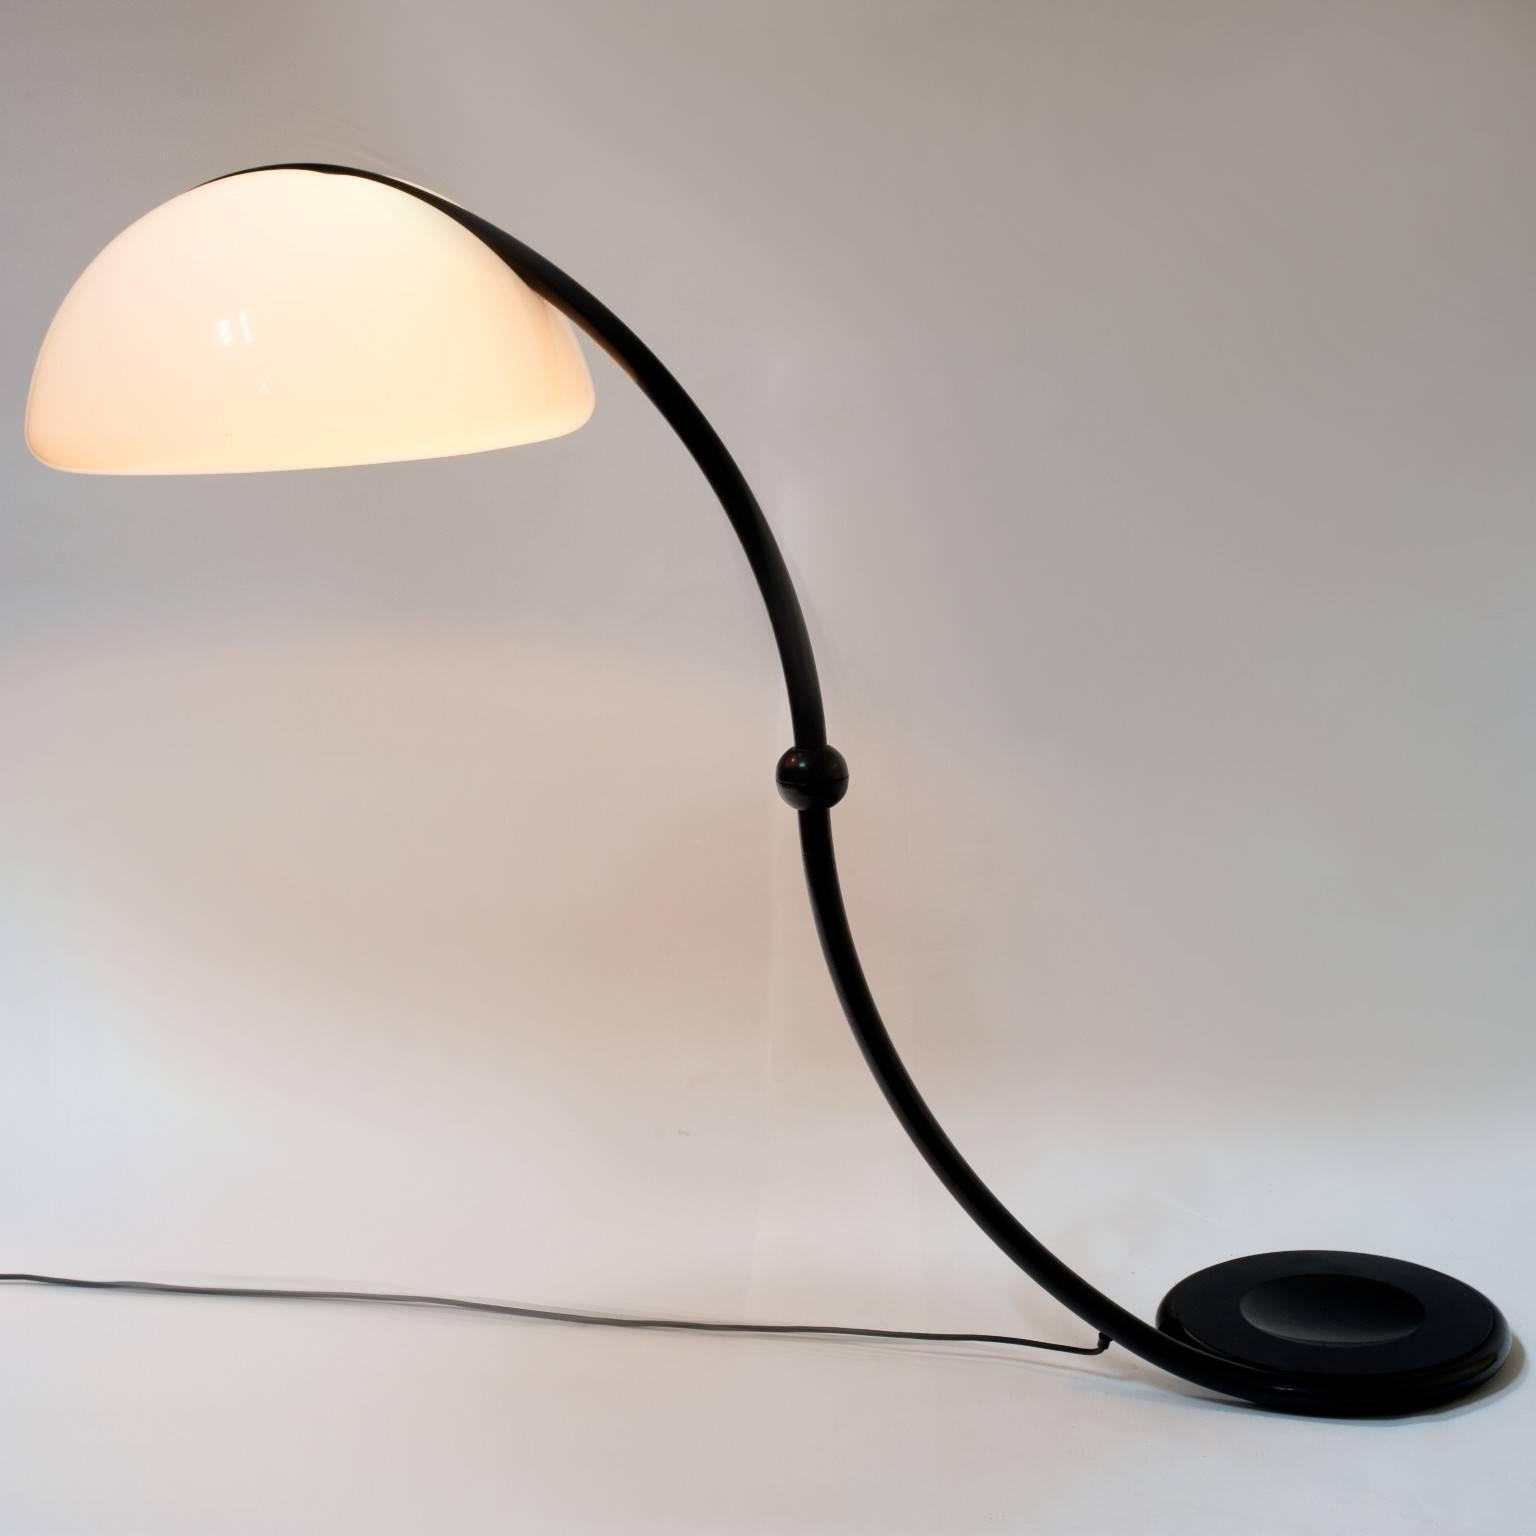 The Serpente lamp was designed by Elio Martinelli for his own brand Martinelli Luce Italy in 1965. Its design and form looks as futuristic today as it did 50 years ago. This timeless lamp is fluid in form and its striking Silhouette is visually